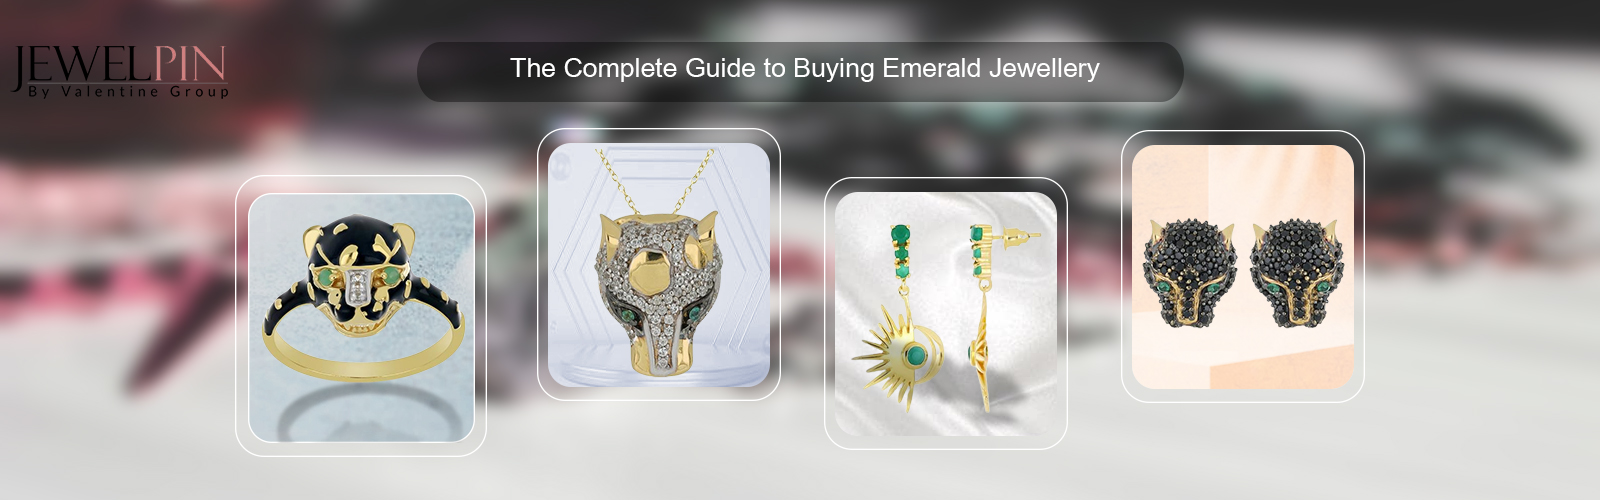 JewelPin - The Complete Guide to Buying Emerald Jewellery: What You Need to Know